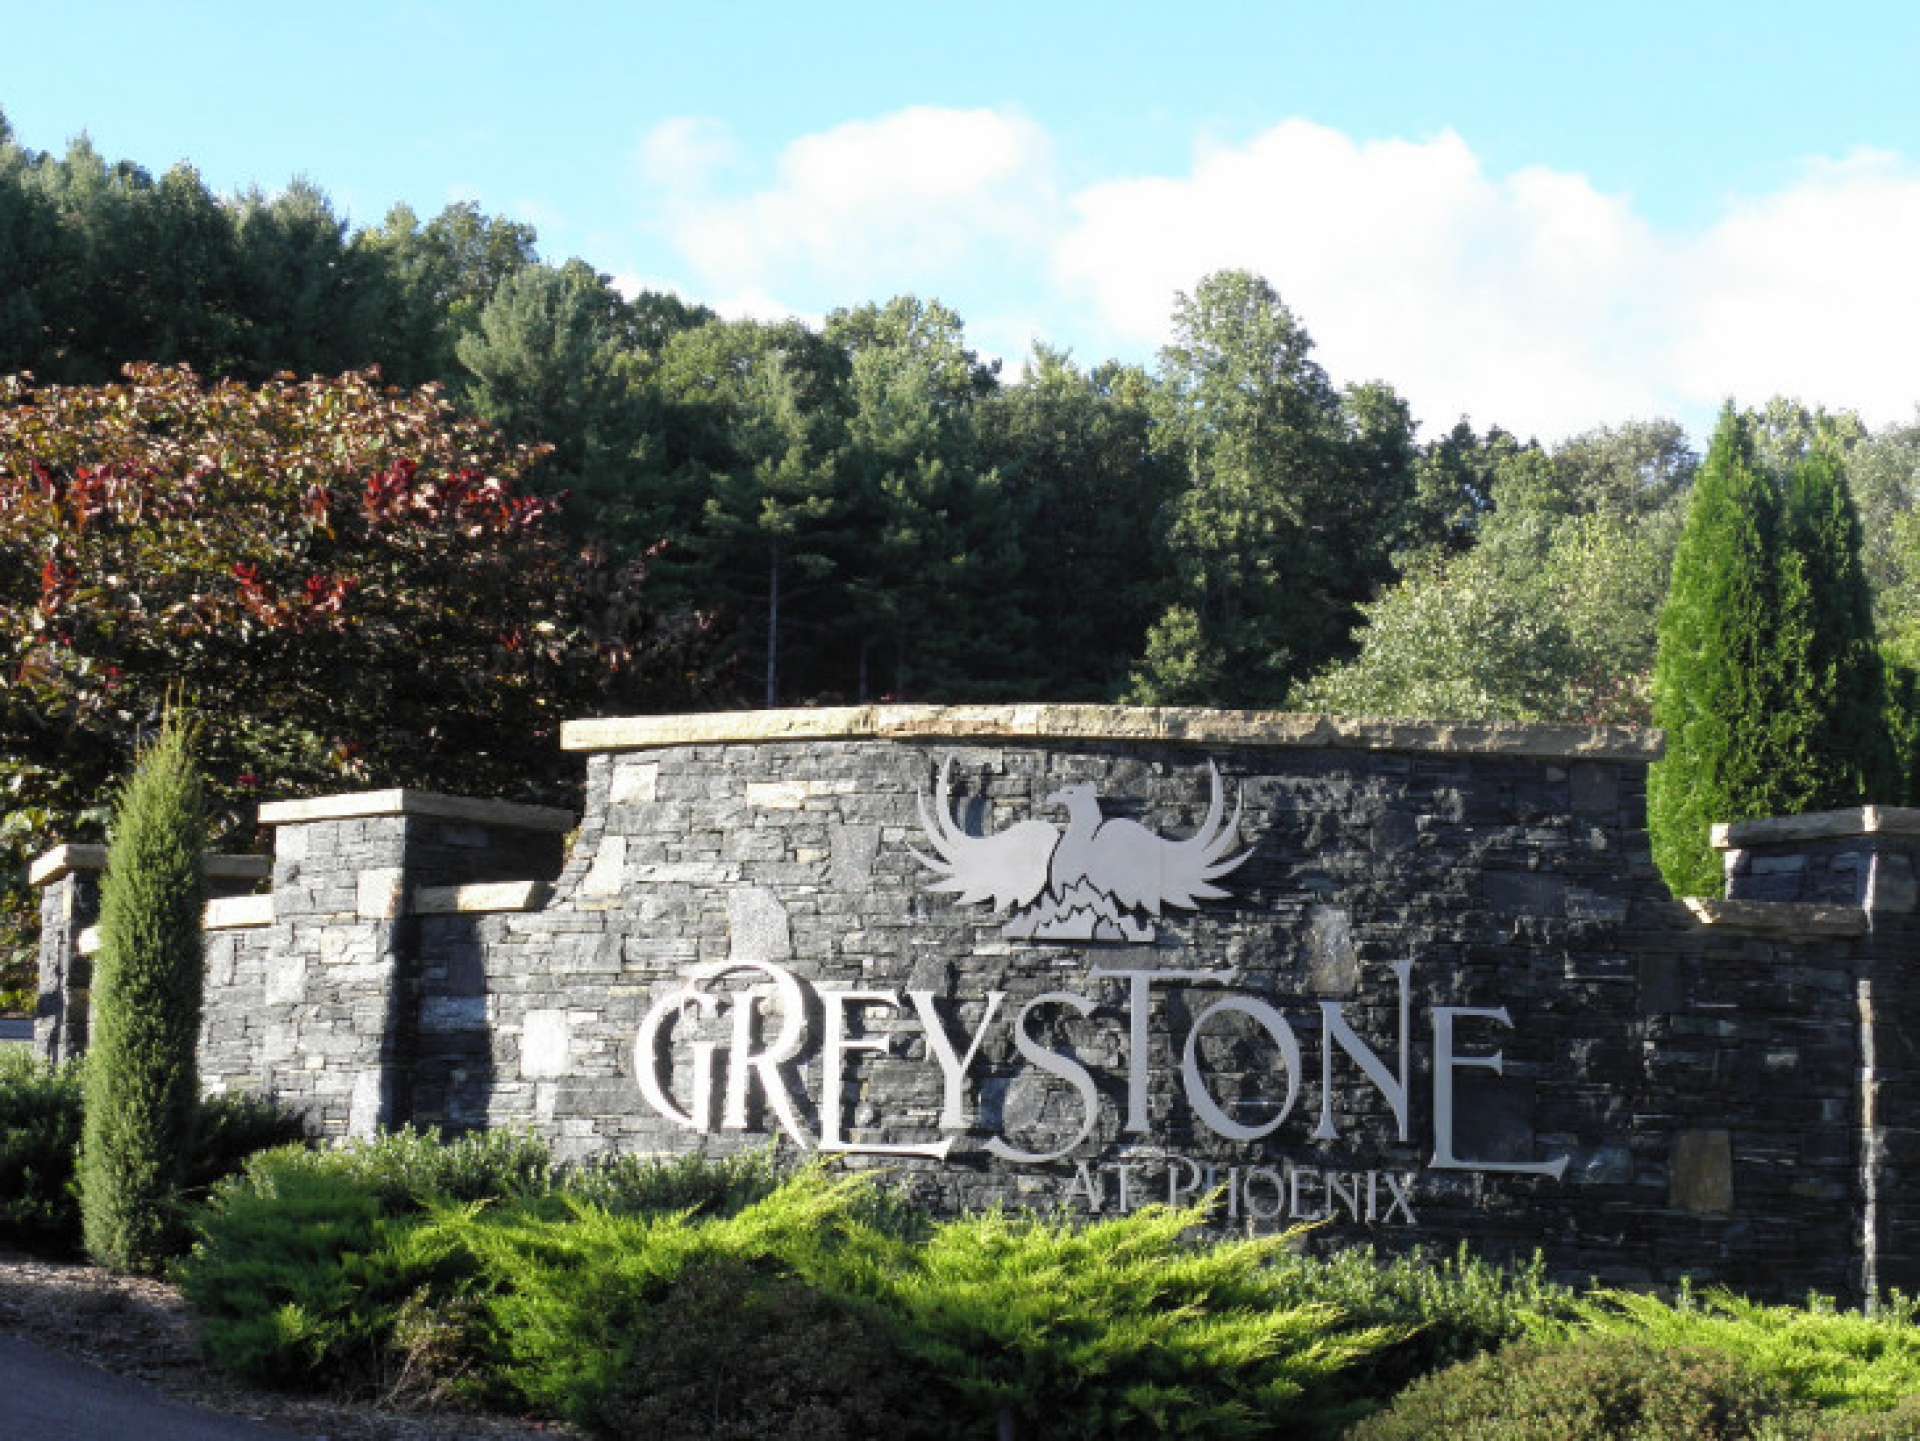 A grand gated entrance with custom detailed structure and water display welcomes residents to their unique mountain home community. Each homesite in Greystone offers access to the common greenways and walking trails.